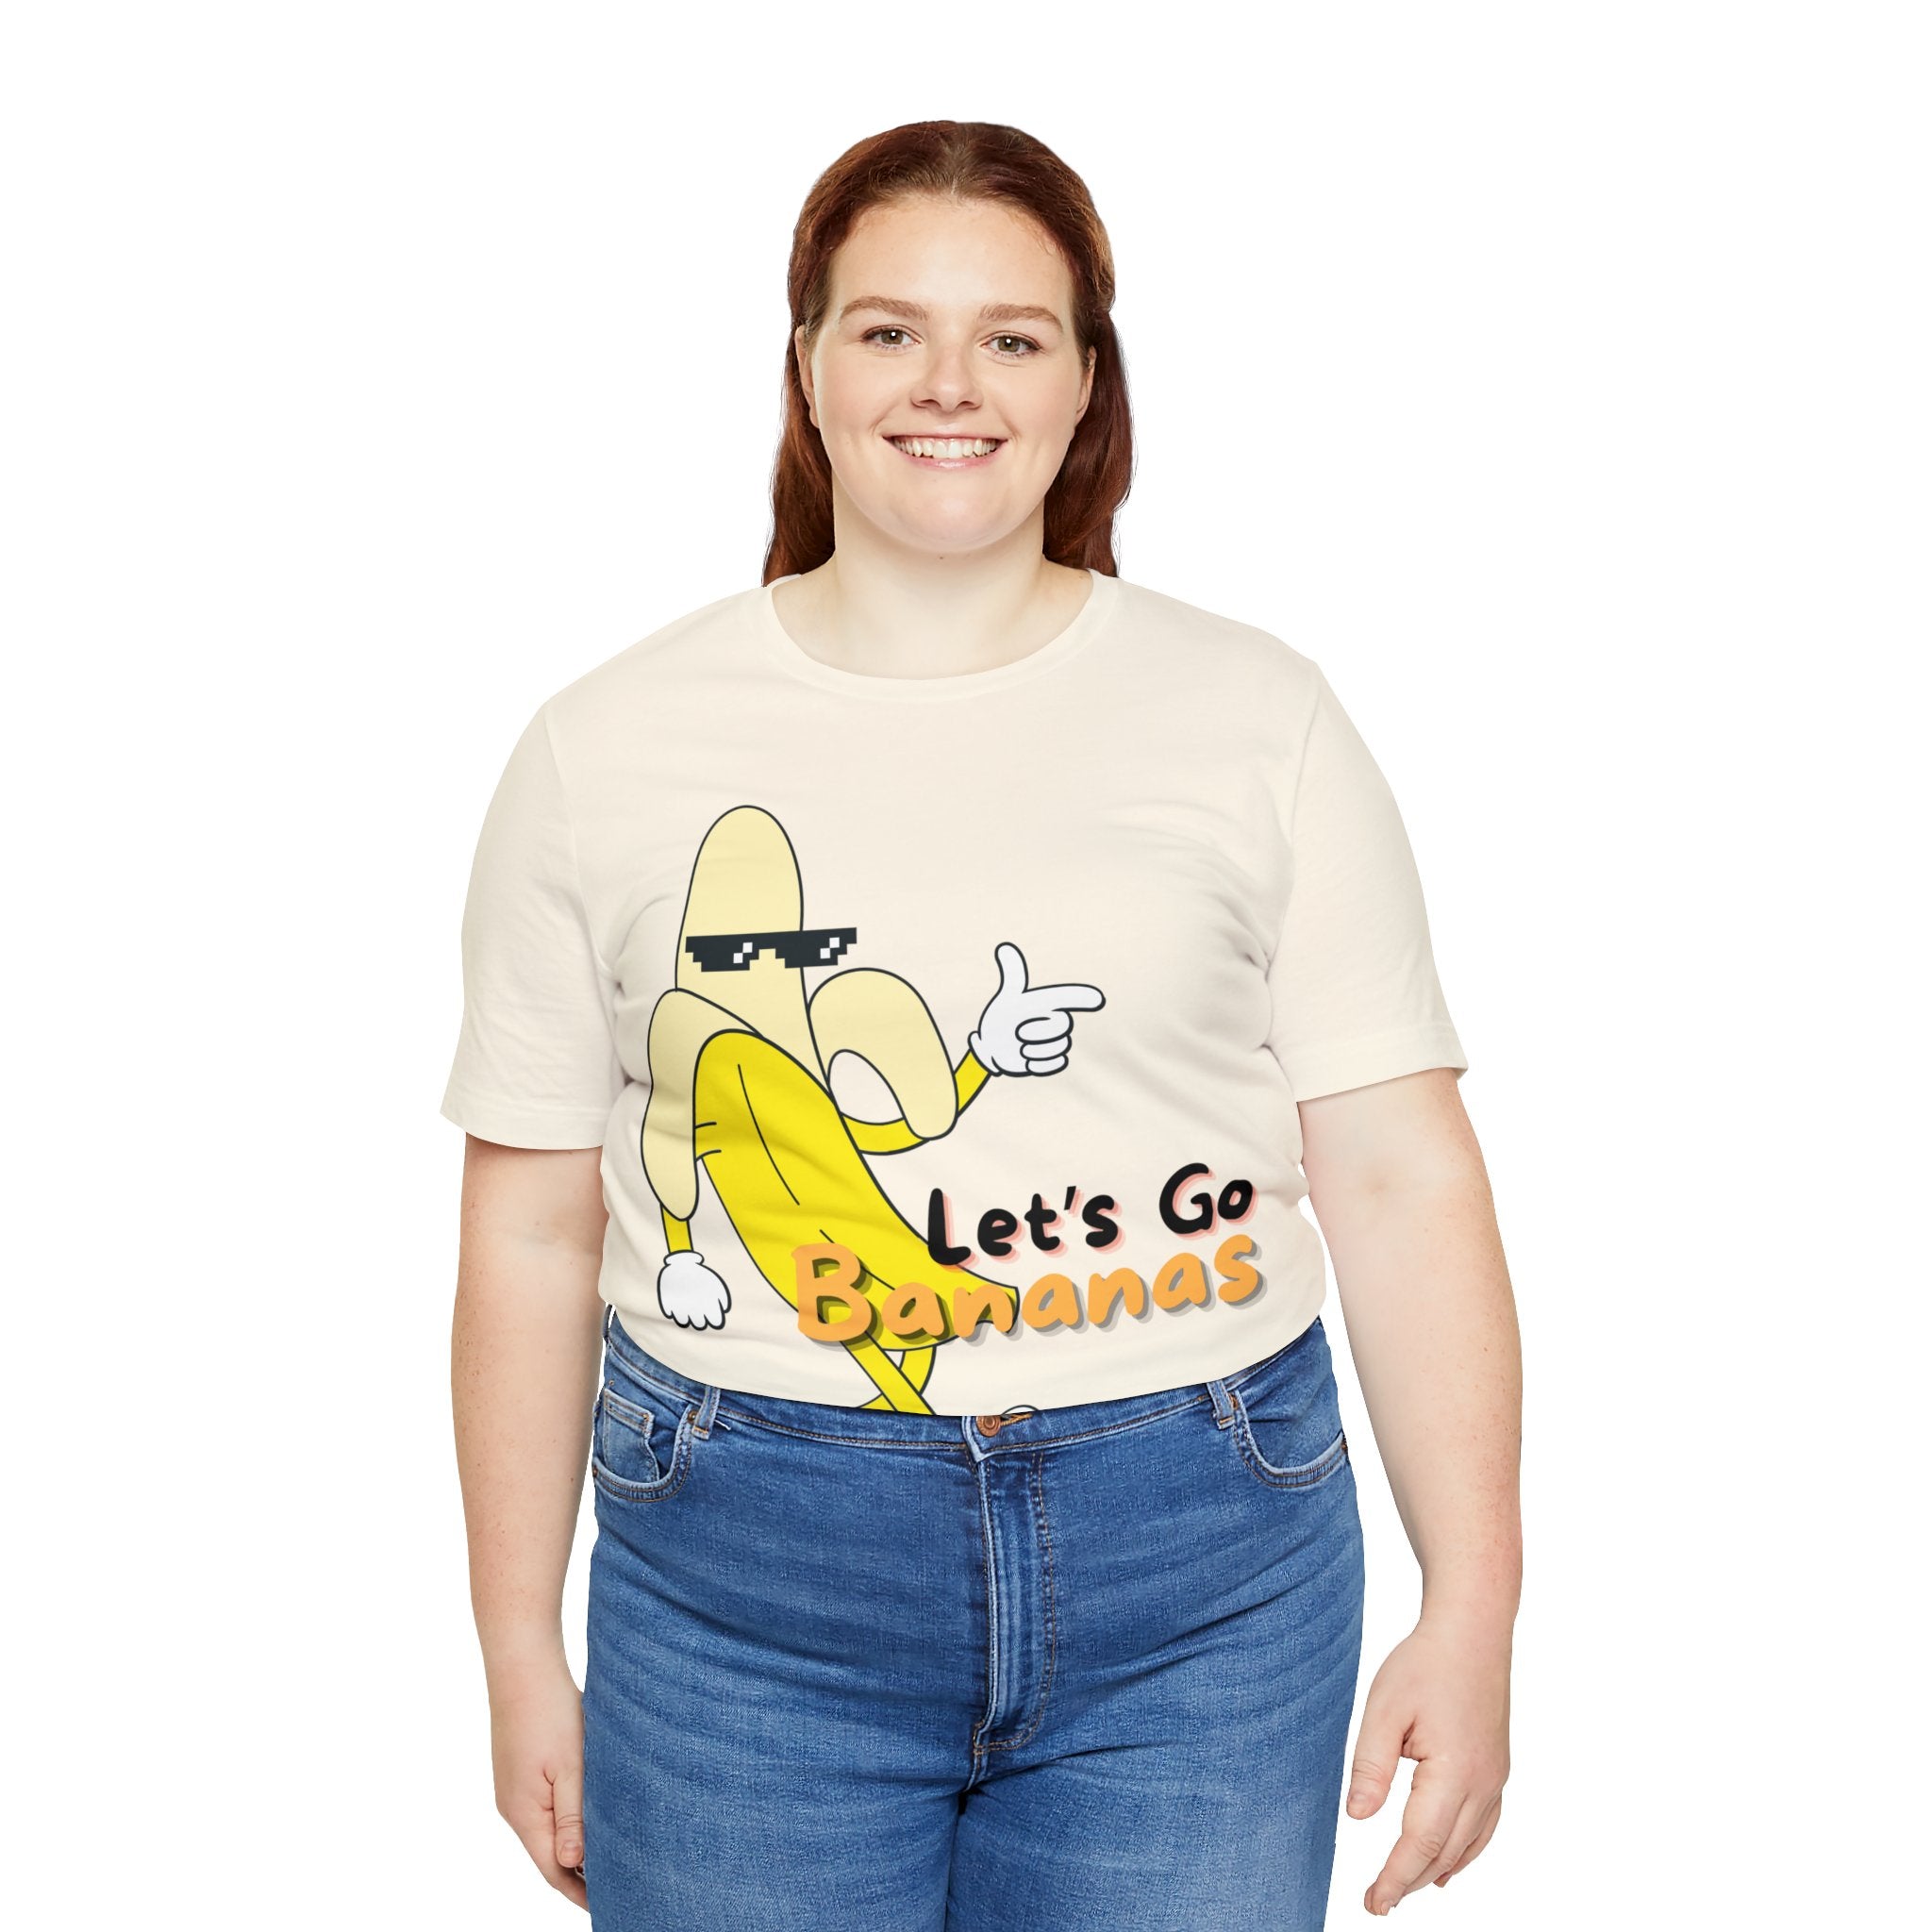 Bananas | Funny Printed Party Themed Unisex T-shirt